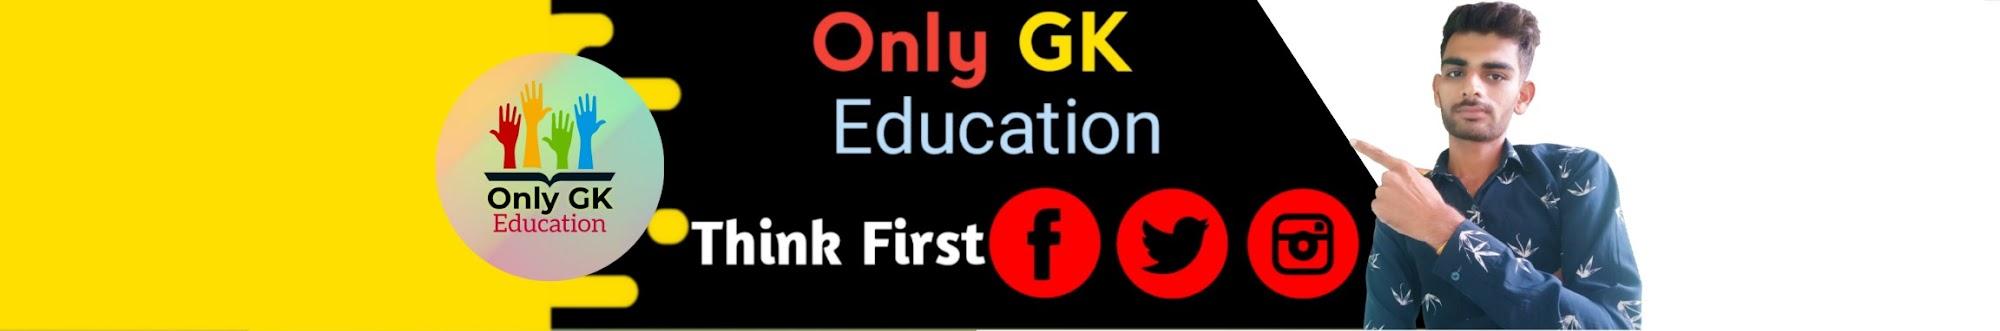 Only GK Education